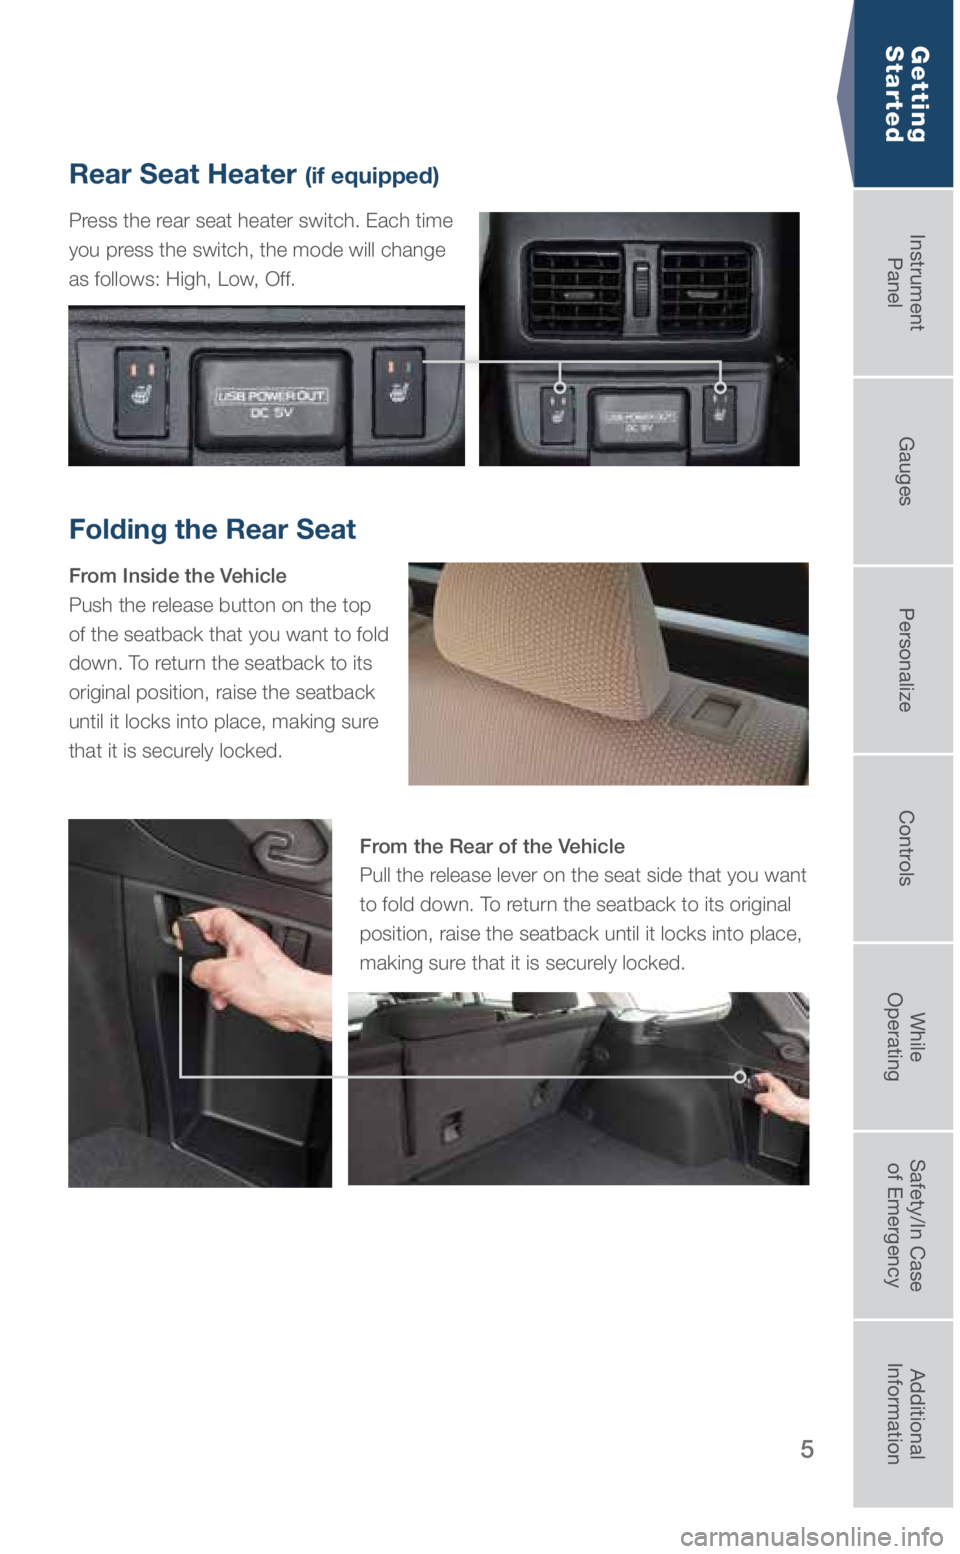 SUBARU OUTBACK 2019  Quick Guide 5
Folding the Rear Seat
From Inside the Vehicle
Push the release button on the top 
of the seatback that you want to fold 
down. To return the seatback to its 
original position, raise the seatback 
u